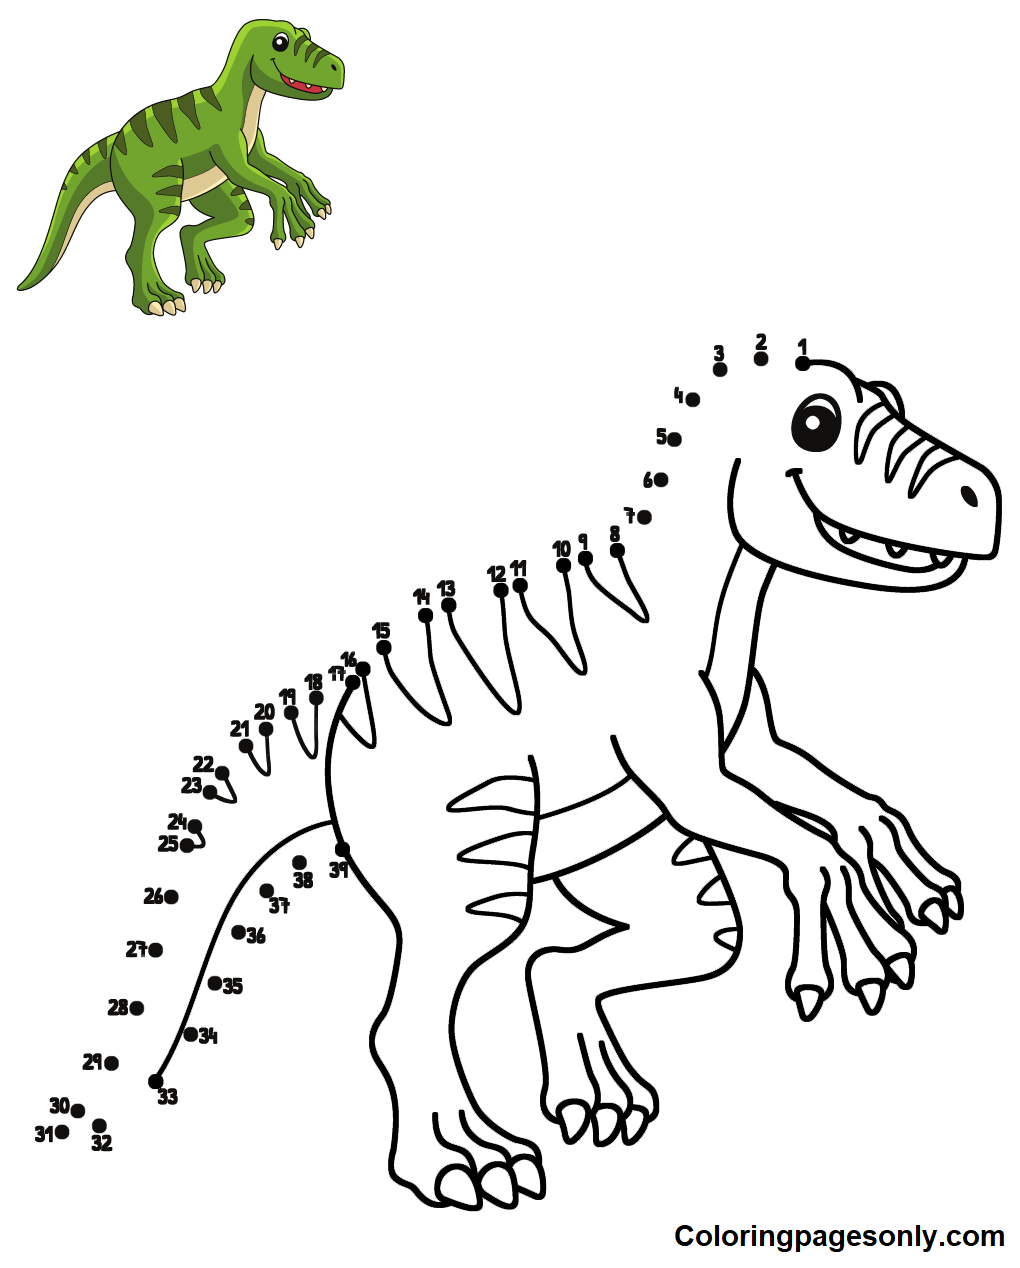 Dot to Dot Velociraptor Coloring Pages